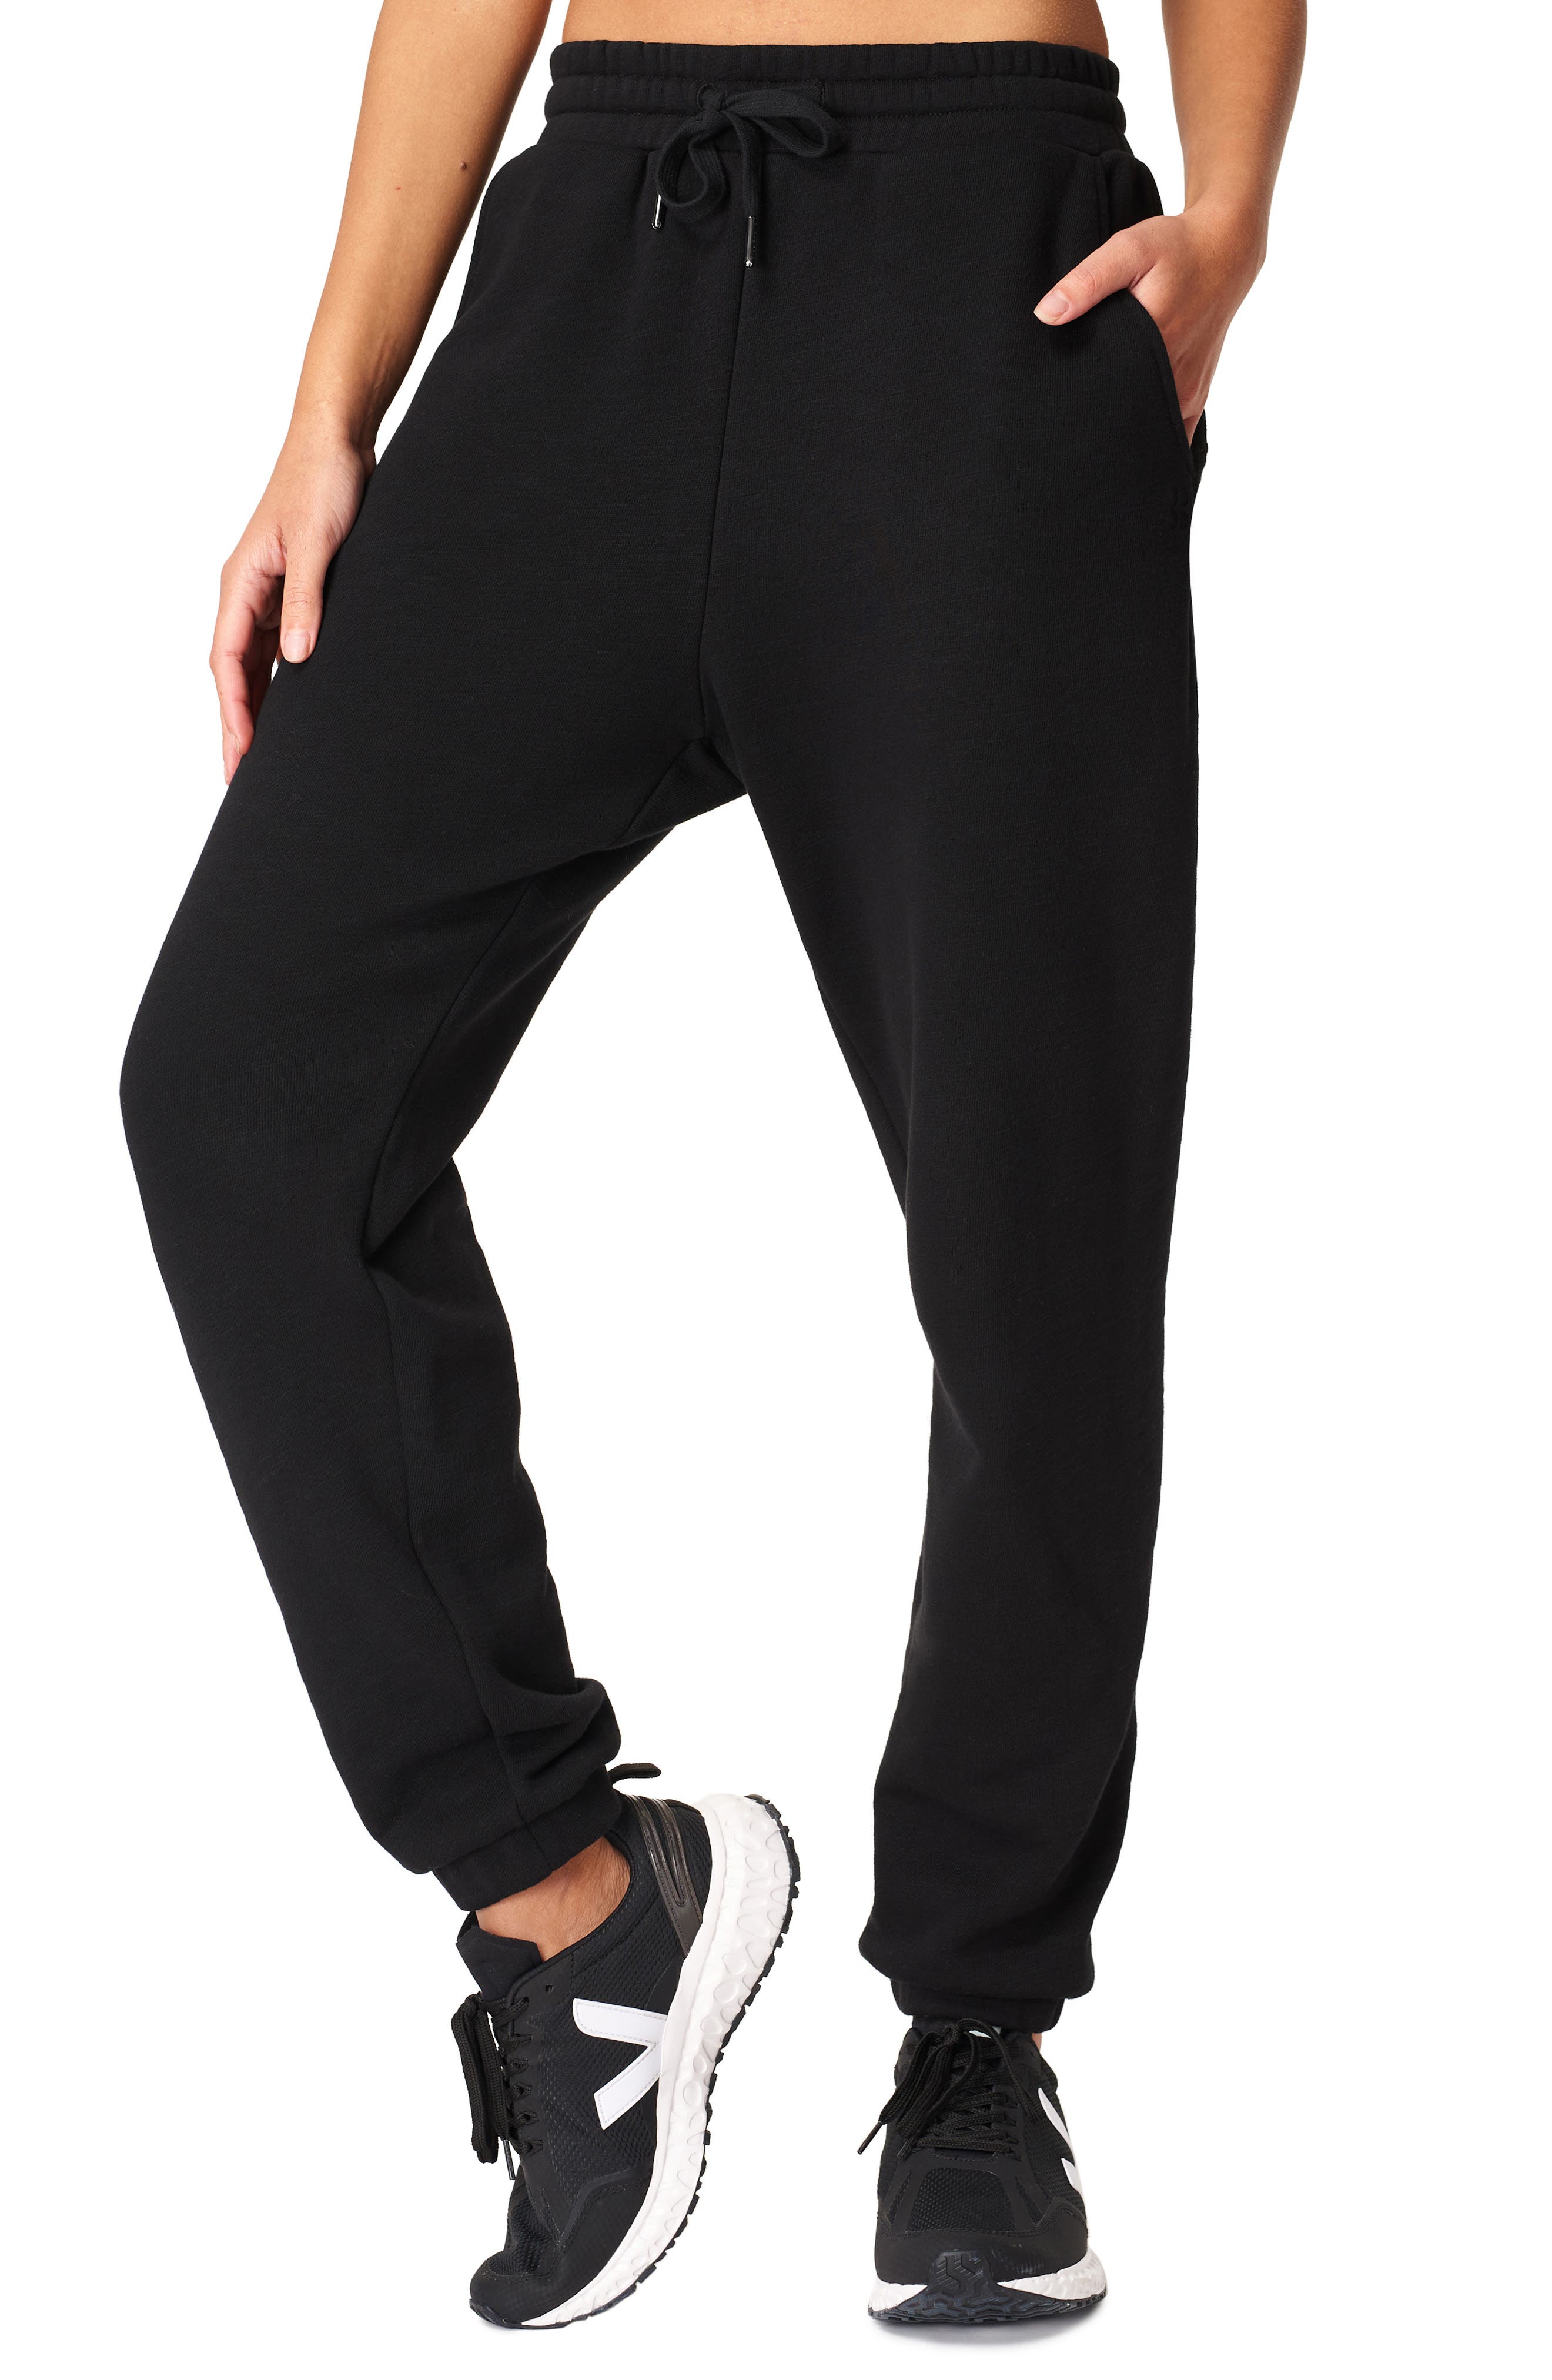 S-XL Angels UK Ladies Womens Jogging Fleece Bottoms Joggers Casual Trousers Cuffed Gym 